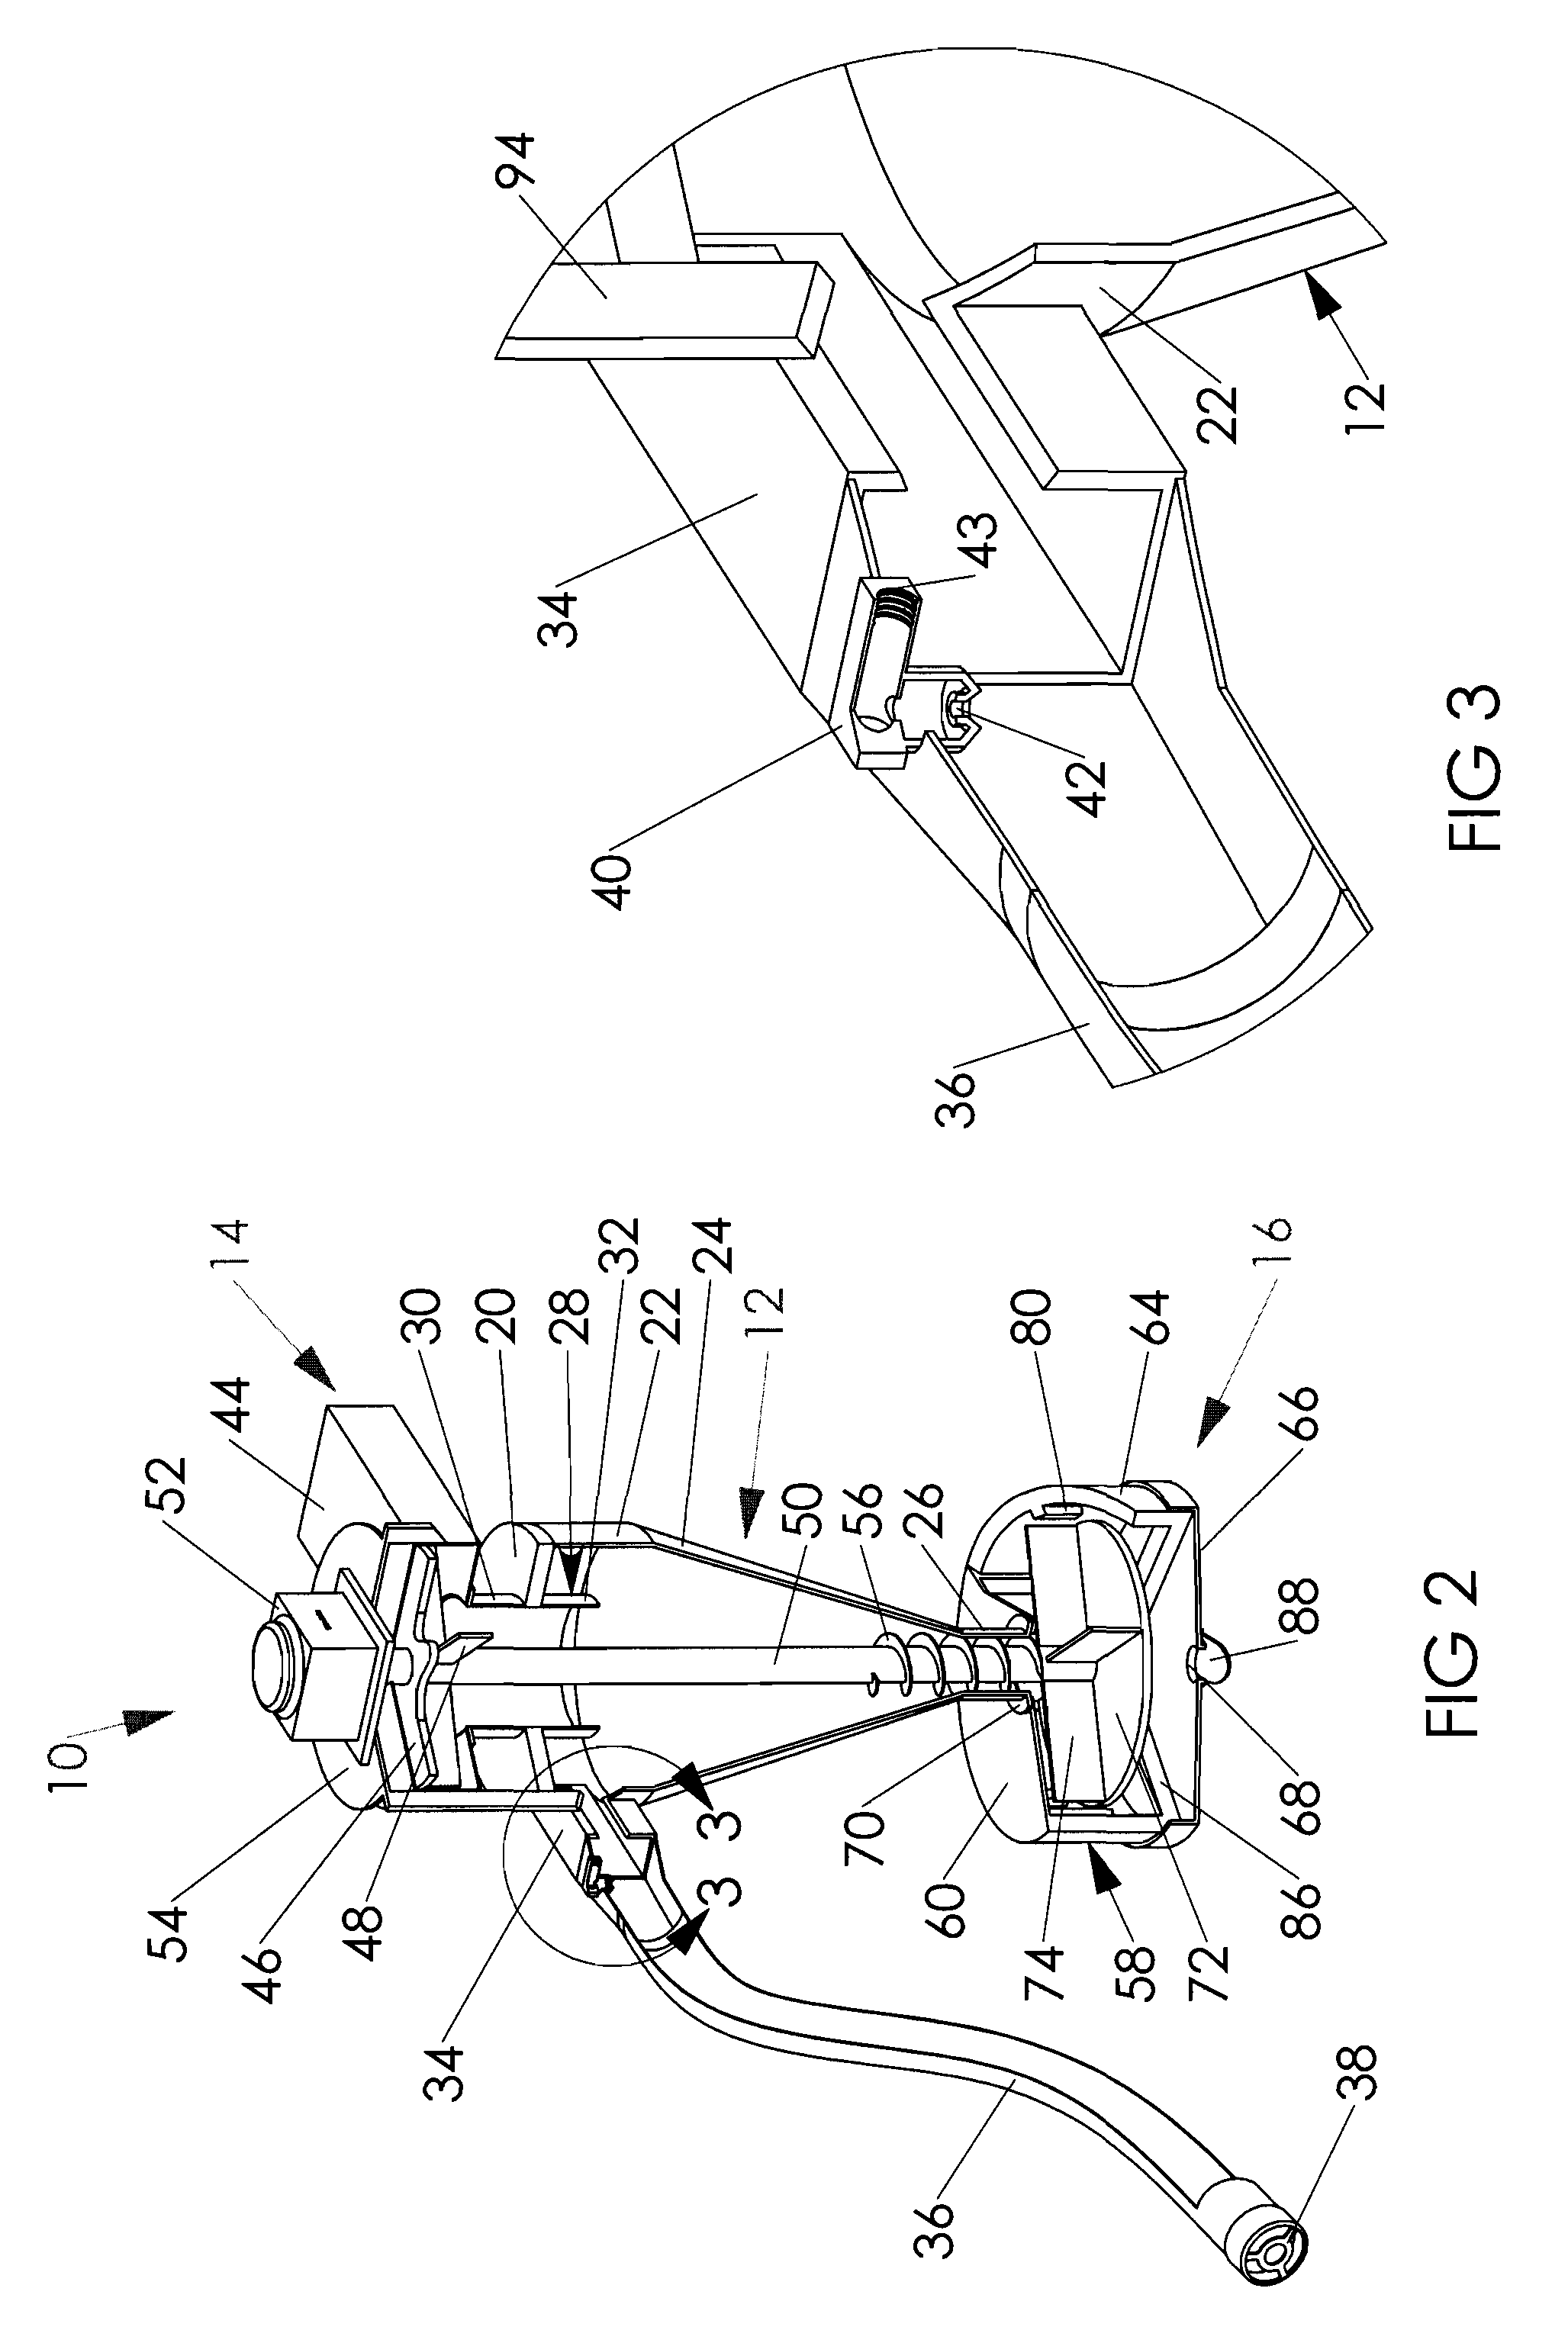 Apparatus and method for collecting and crushing seashells on a beach